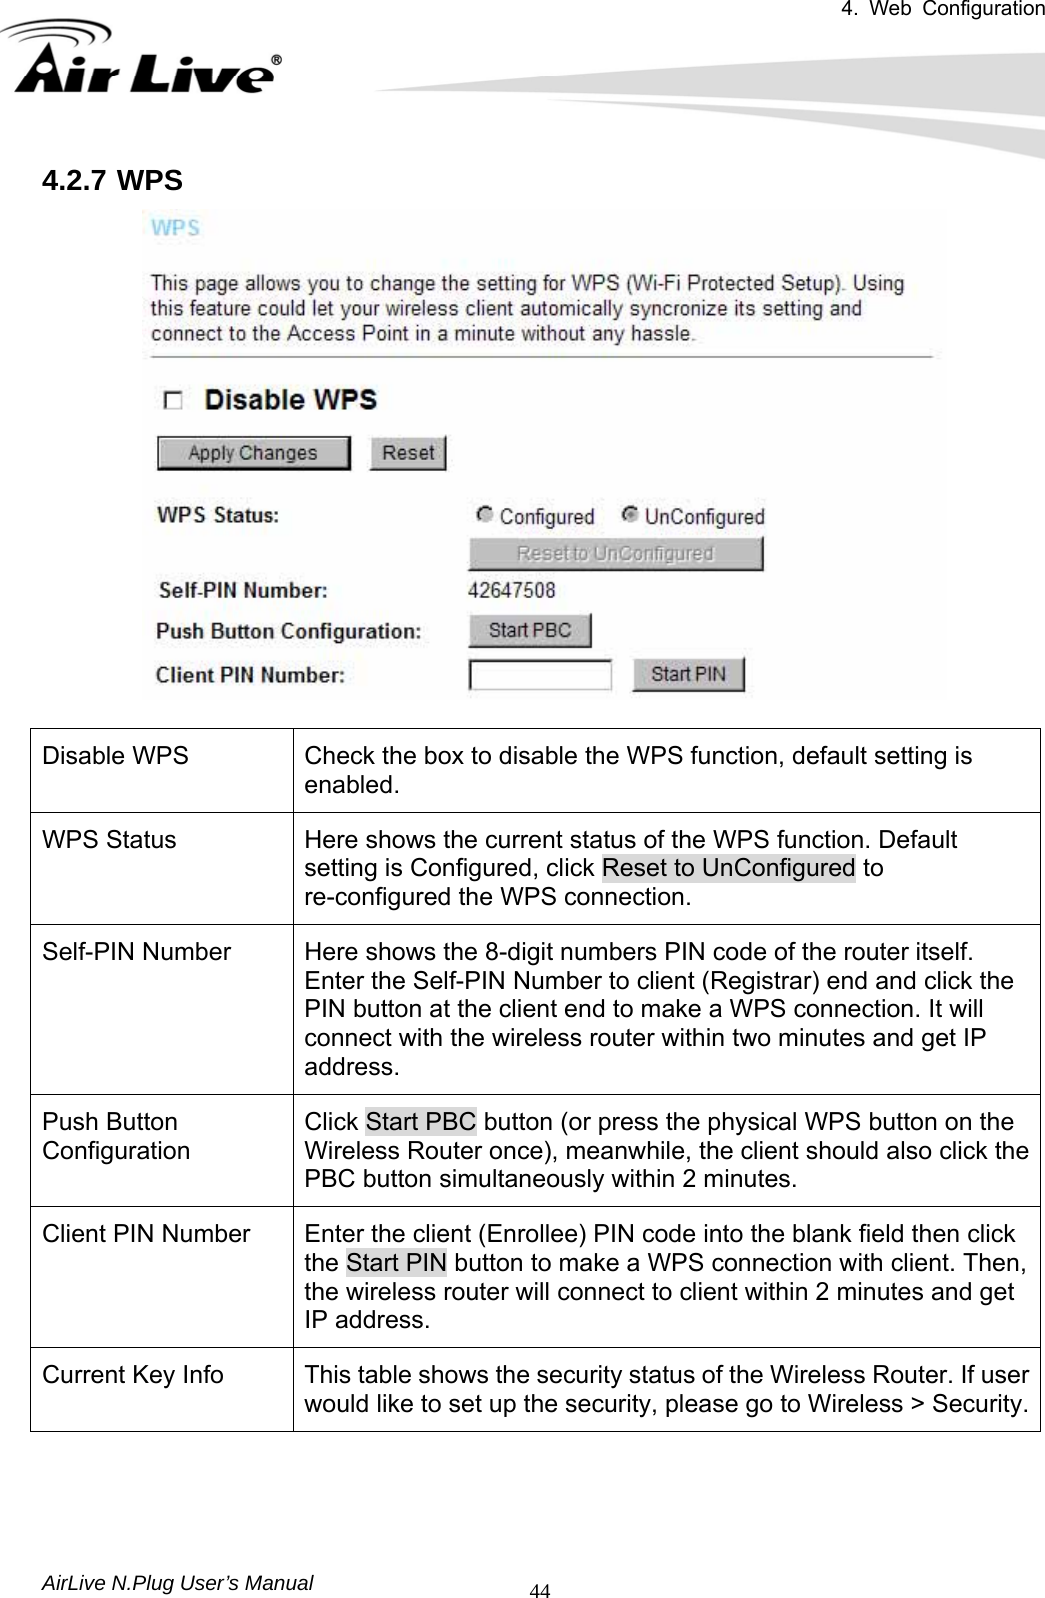 4. Web Configuration       AirLive N.Plug User’s Manual  444.2.7 WPS   Disable WPS  Check the box to disable the WPS function, default setting is enabled. WPS Status  Here shows the current status of the WPS function. Default setting is Configured, click Reset to UnConfigured to re-configured the WPS connection. Self-PIN Number  Here shows the 8-digit numbers PIN code of the router itself.   Enter the Self-PIN Number to client (Registrar) end and click the PIN button at the client end to make a WPS connection. It will connect with the wireless router within two minutes and get IP address. Push Button Configuration Click Start PBC button (or press the physical WPS button on the Wireless Router once), meanwhile, the client should also click the PBC button simultaneously within 2 minutes. Client PIN Number  Enter the client (Enrollee) PIN code into the blank field then click the Start PIN button to make a WPS connection with client. Then, the wireless router will connect to client within 2 minutes and get IP address. Current Key Info  This table shows the security status of the Wireless Router. If user would like to set up the security, please go to Wireless &gt; Security. 